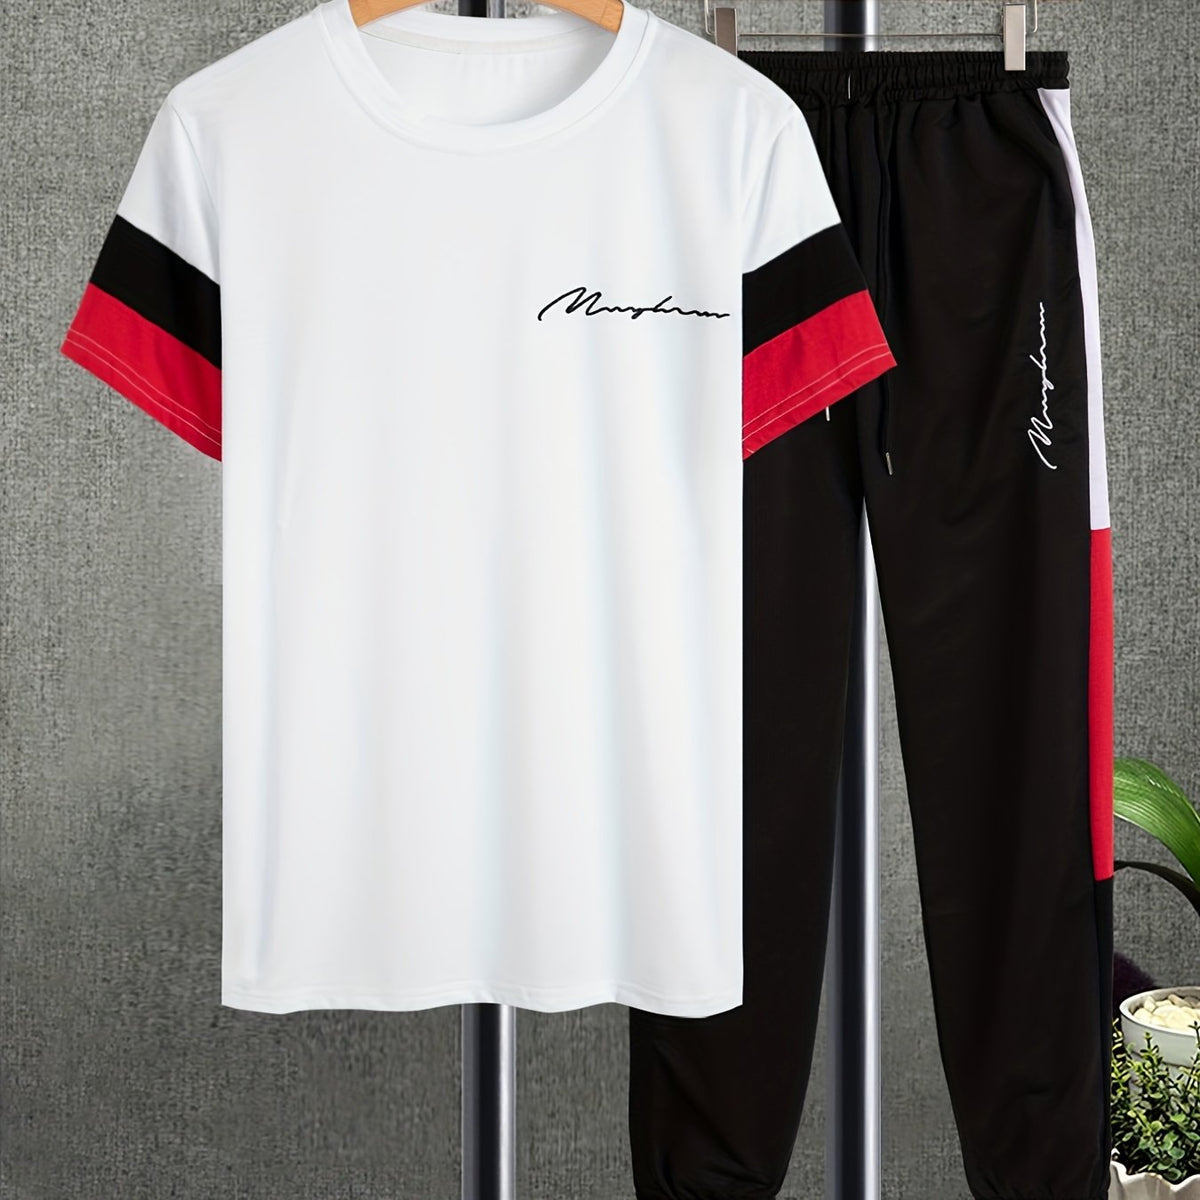 「lovevop」Men's Colorblock Casual T-shirt Outfit Set, 2 Pieces Round Neck Short Sleeve Tees And Drawstring Long Pants